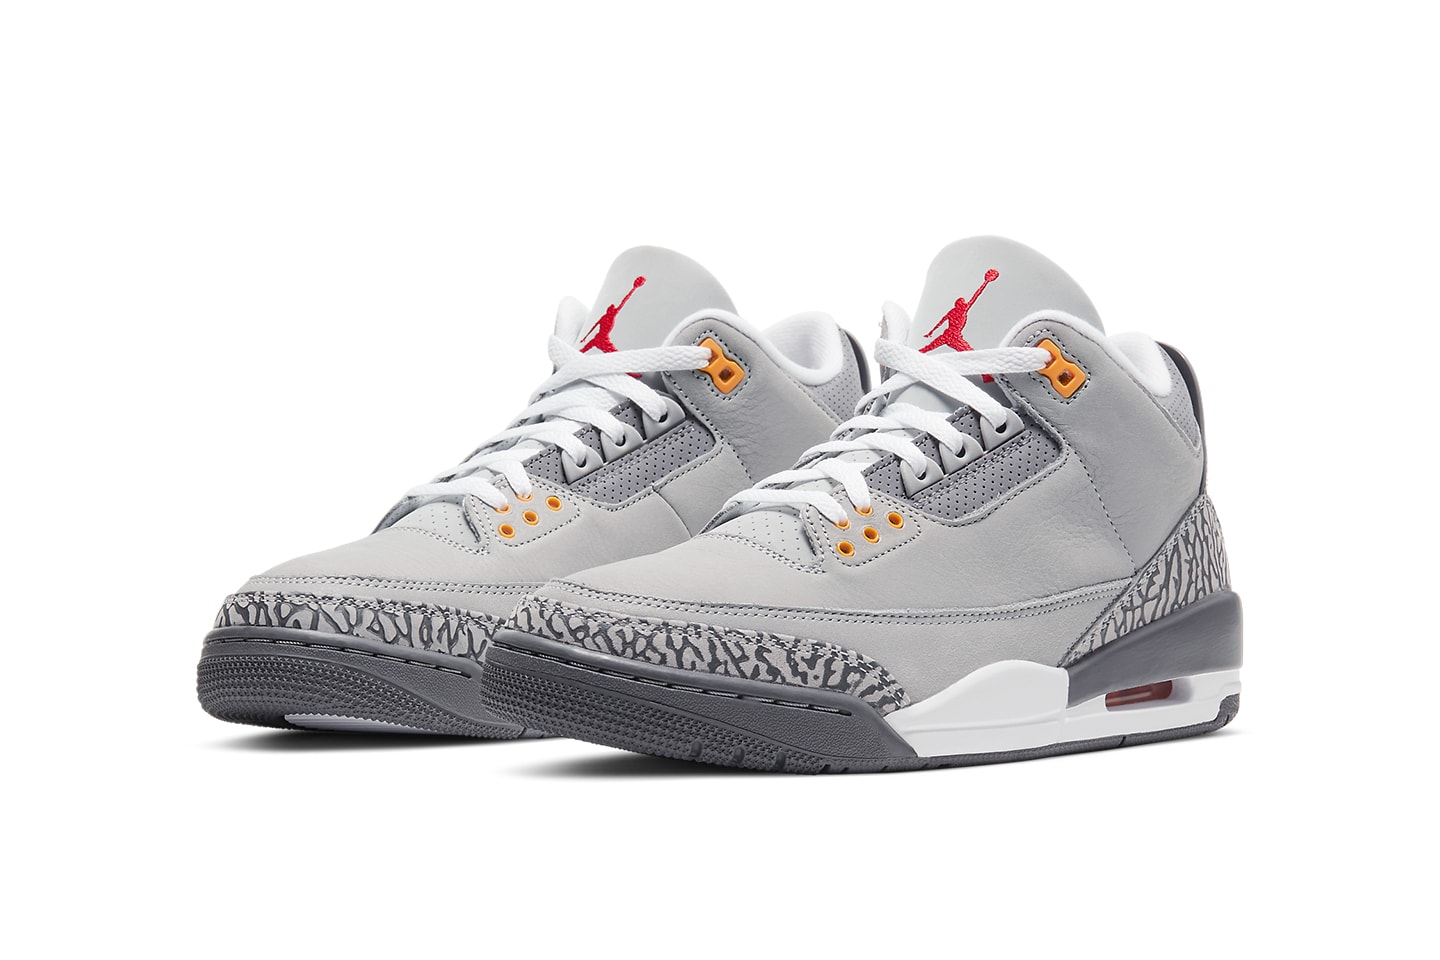 air jordan 3 cool grey CT8532 012 release date info photos store list buying guide 